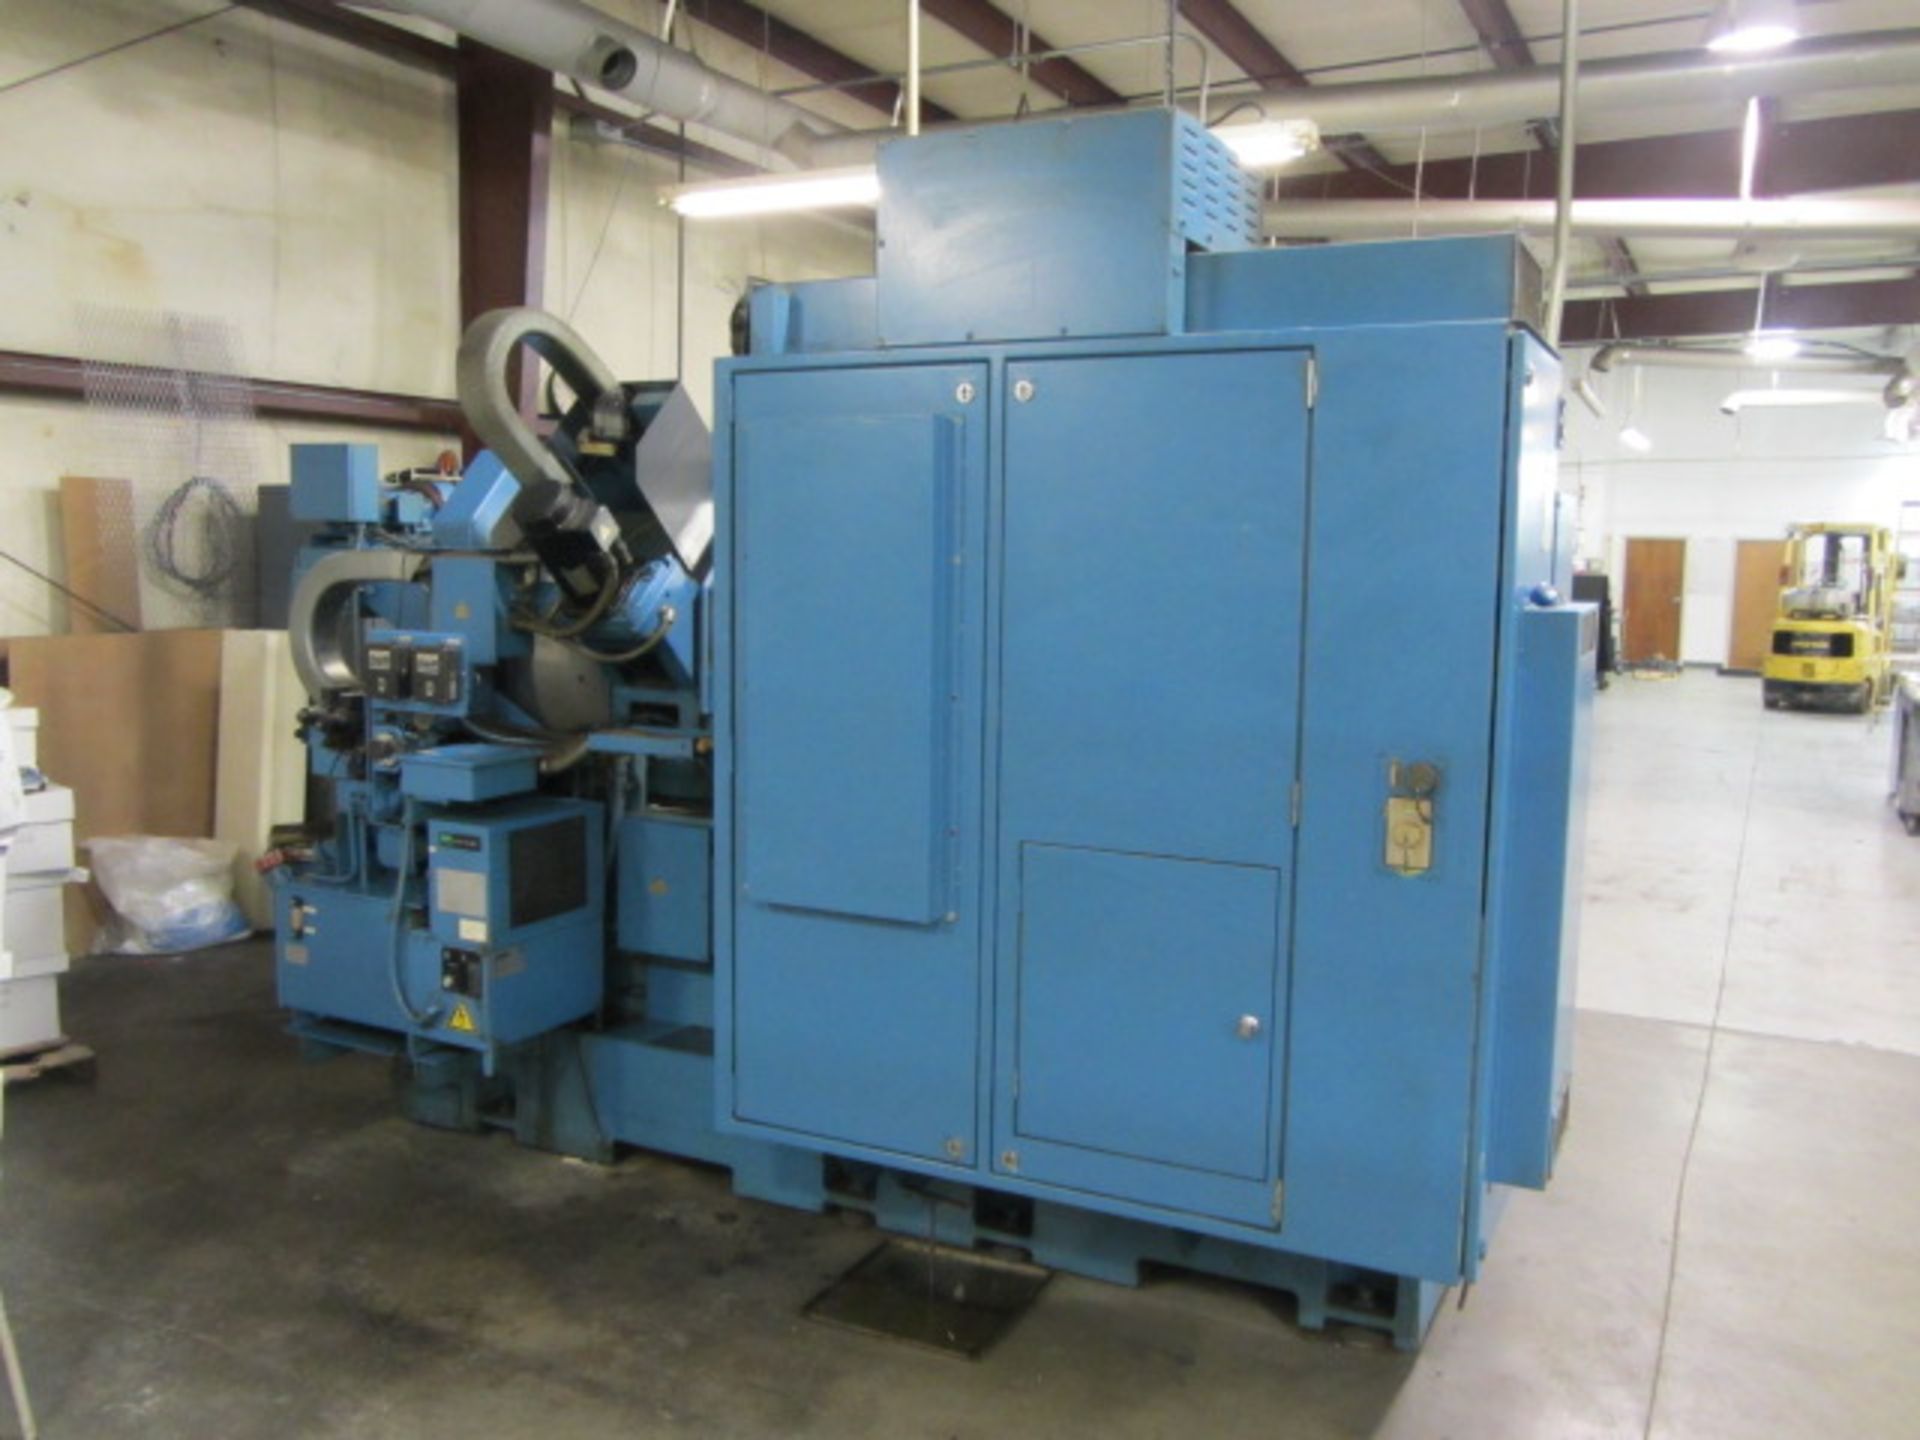 Okuma LC20 CNC Turning Center with 10'' 3-Jaw Power Chuck, 24'' Max Distance to Tailstock, Spindle - Image 6 of 8